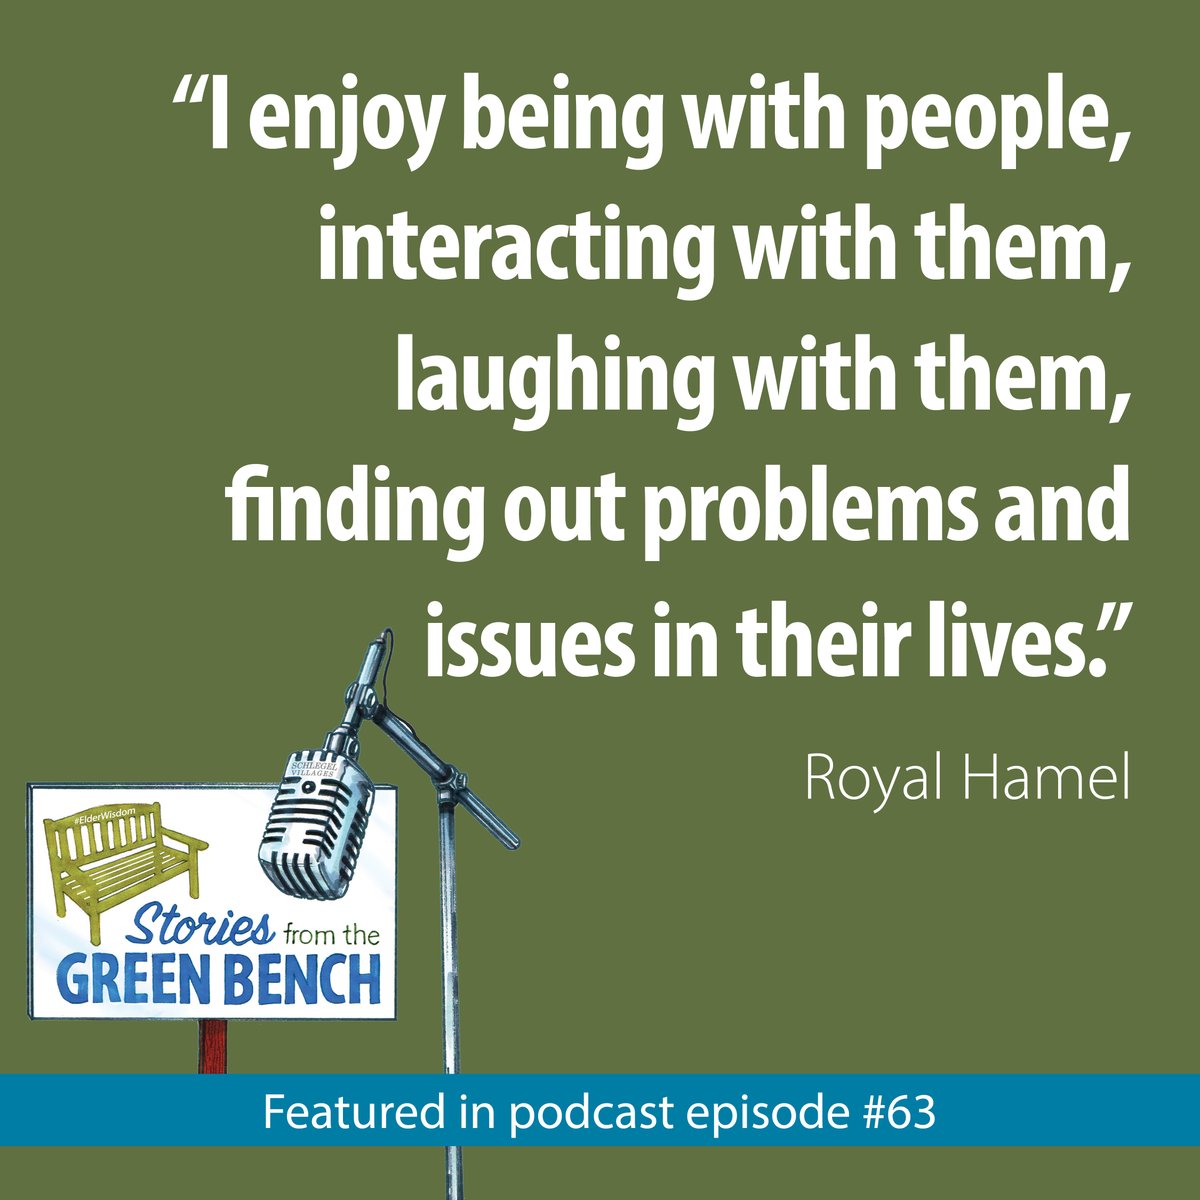 Learn about the importance of sharing personal experiences and spreading compassion from Royal's perspective on the Green Bench. His words will inspire you to connect with others and make a difference. #ElderWisdom Listen 🎙️ schlegelvillages.com/podcast/episod…